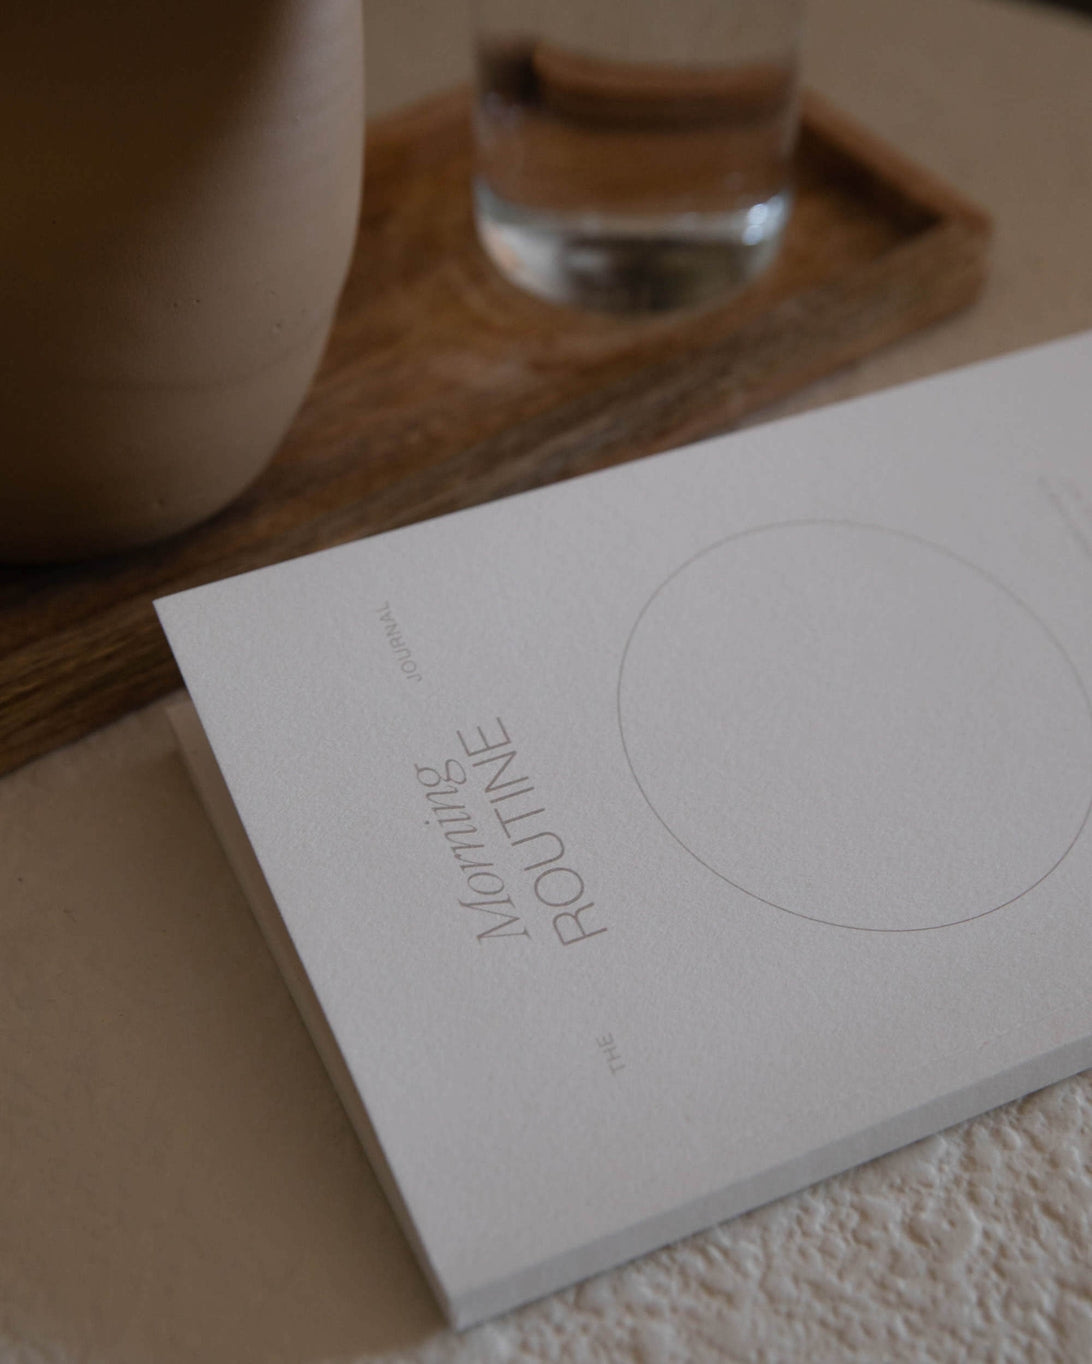 The Morning Routine Journal will walk you through crafting your ideal morning routine by defining specific morning rituals that allow you to slow down, prioritize yourself and step into a new day ahead.